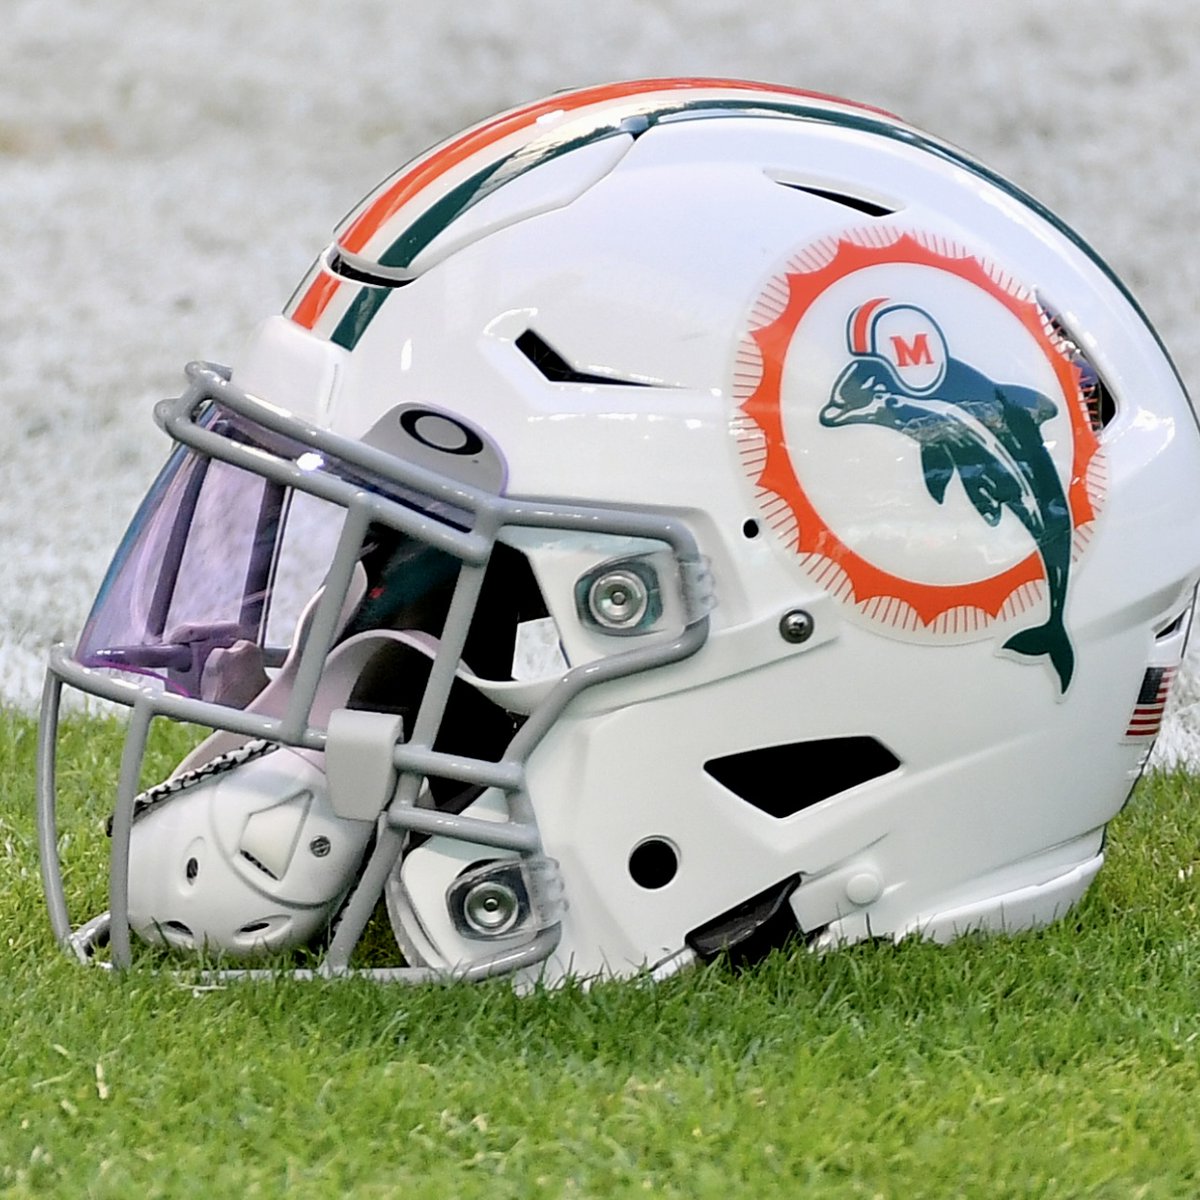 🚨 Vintage Helmet Showdown 🚨 Between the @AtlantaFalcons and @MiamiDolphins, the team with the better retro helmet was _______? RT: Dolphins Like: Falcons